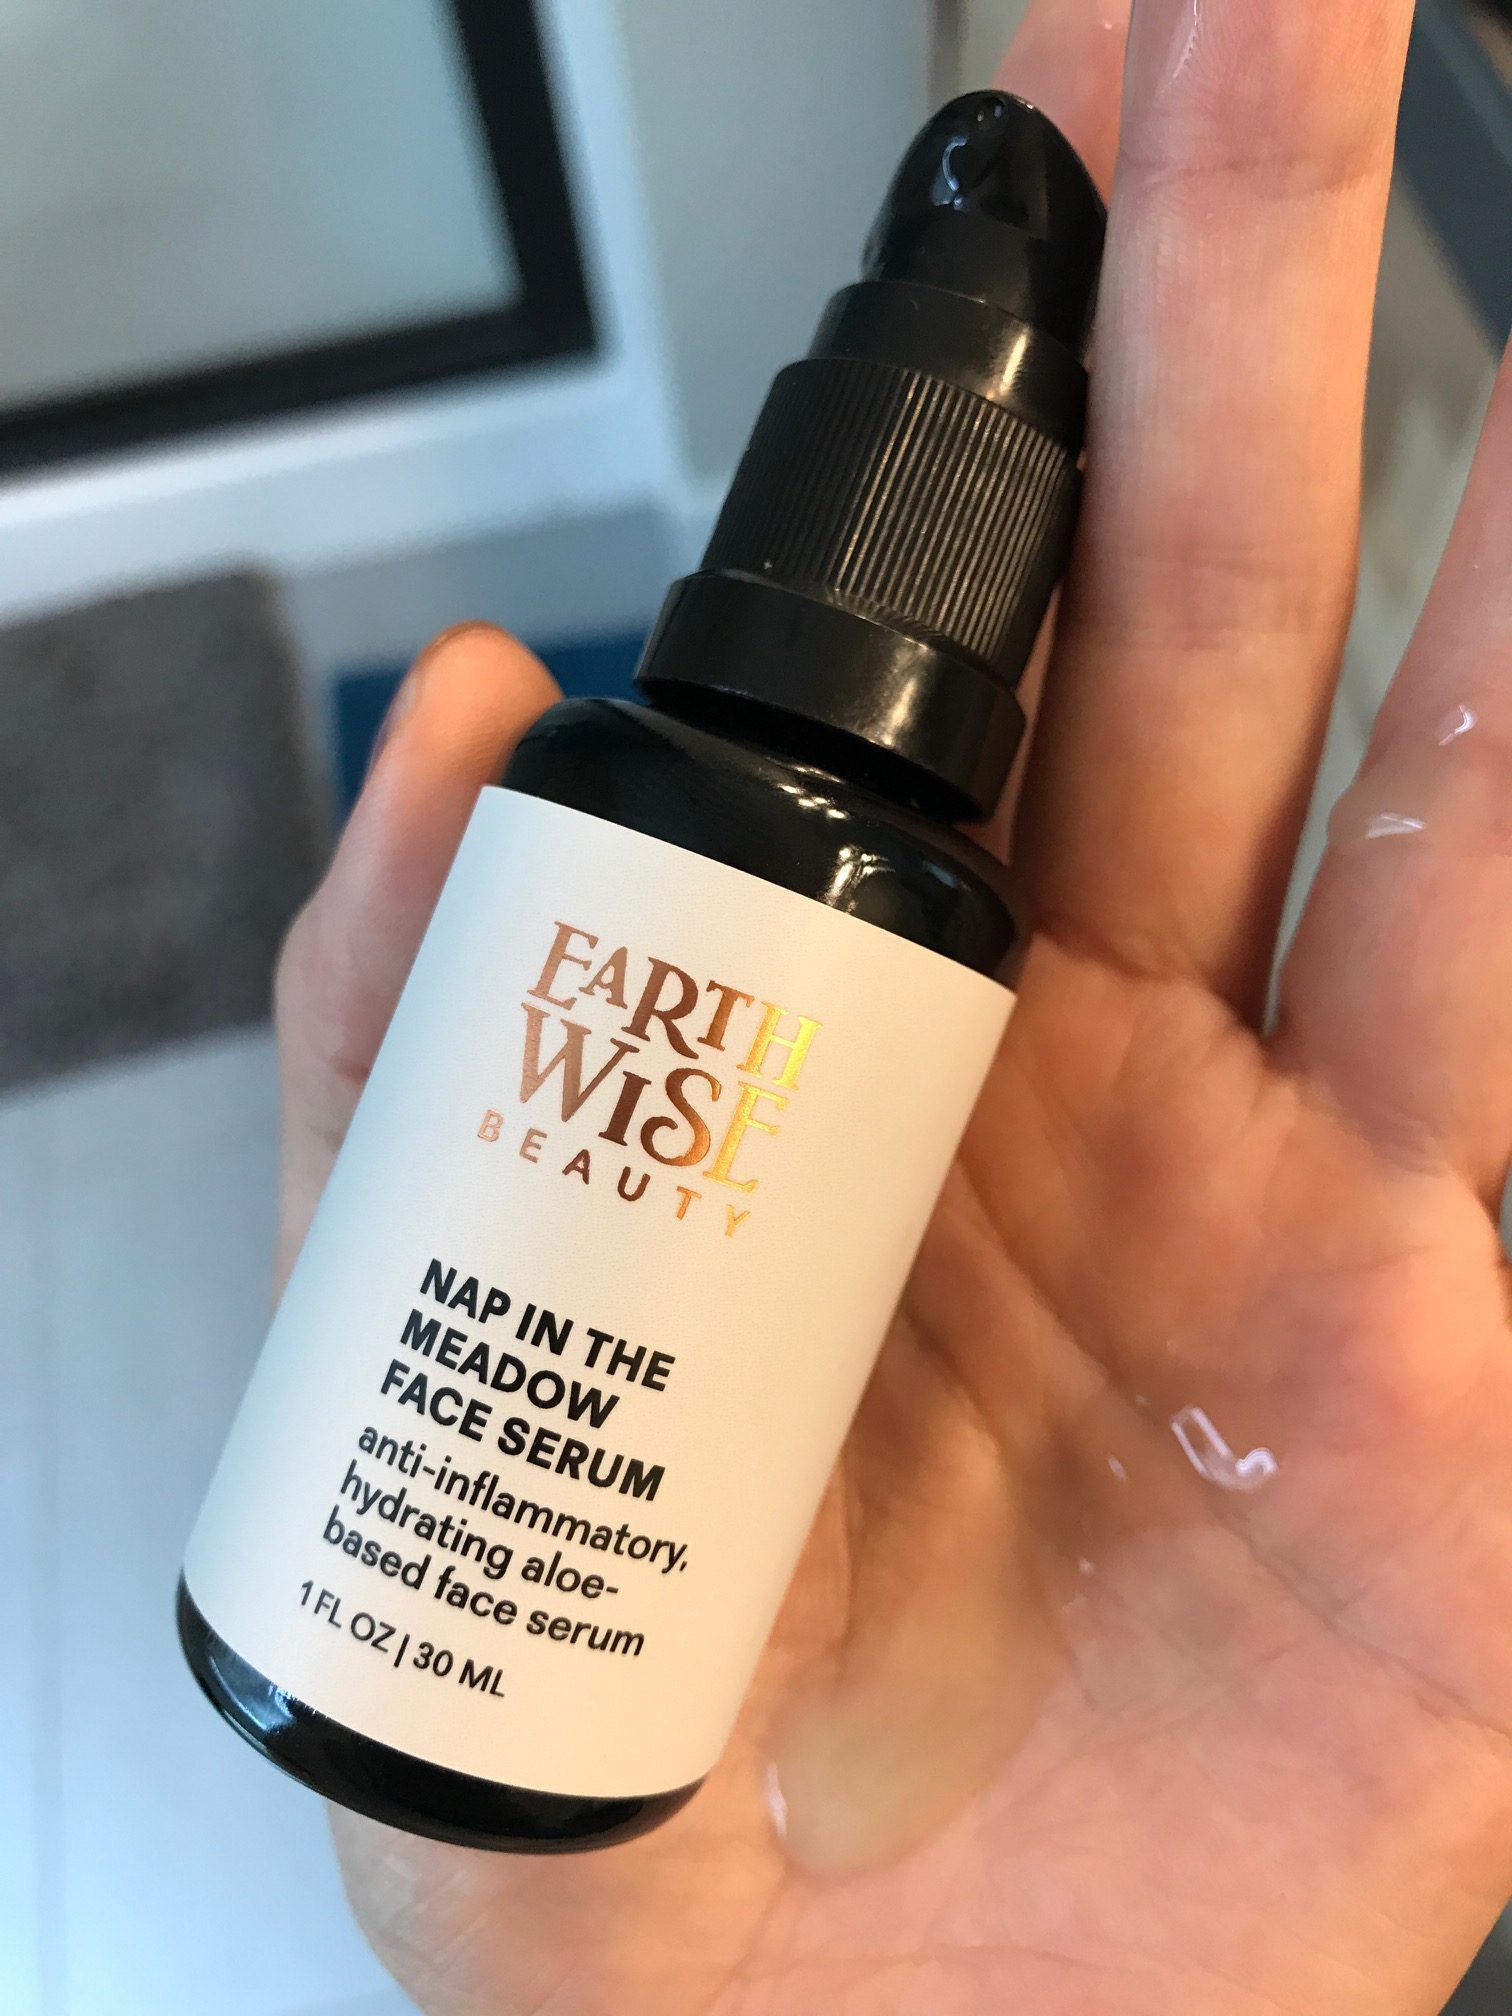 Nap in the Meadow Face Serum Earthwise Beauty